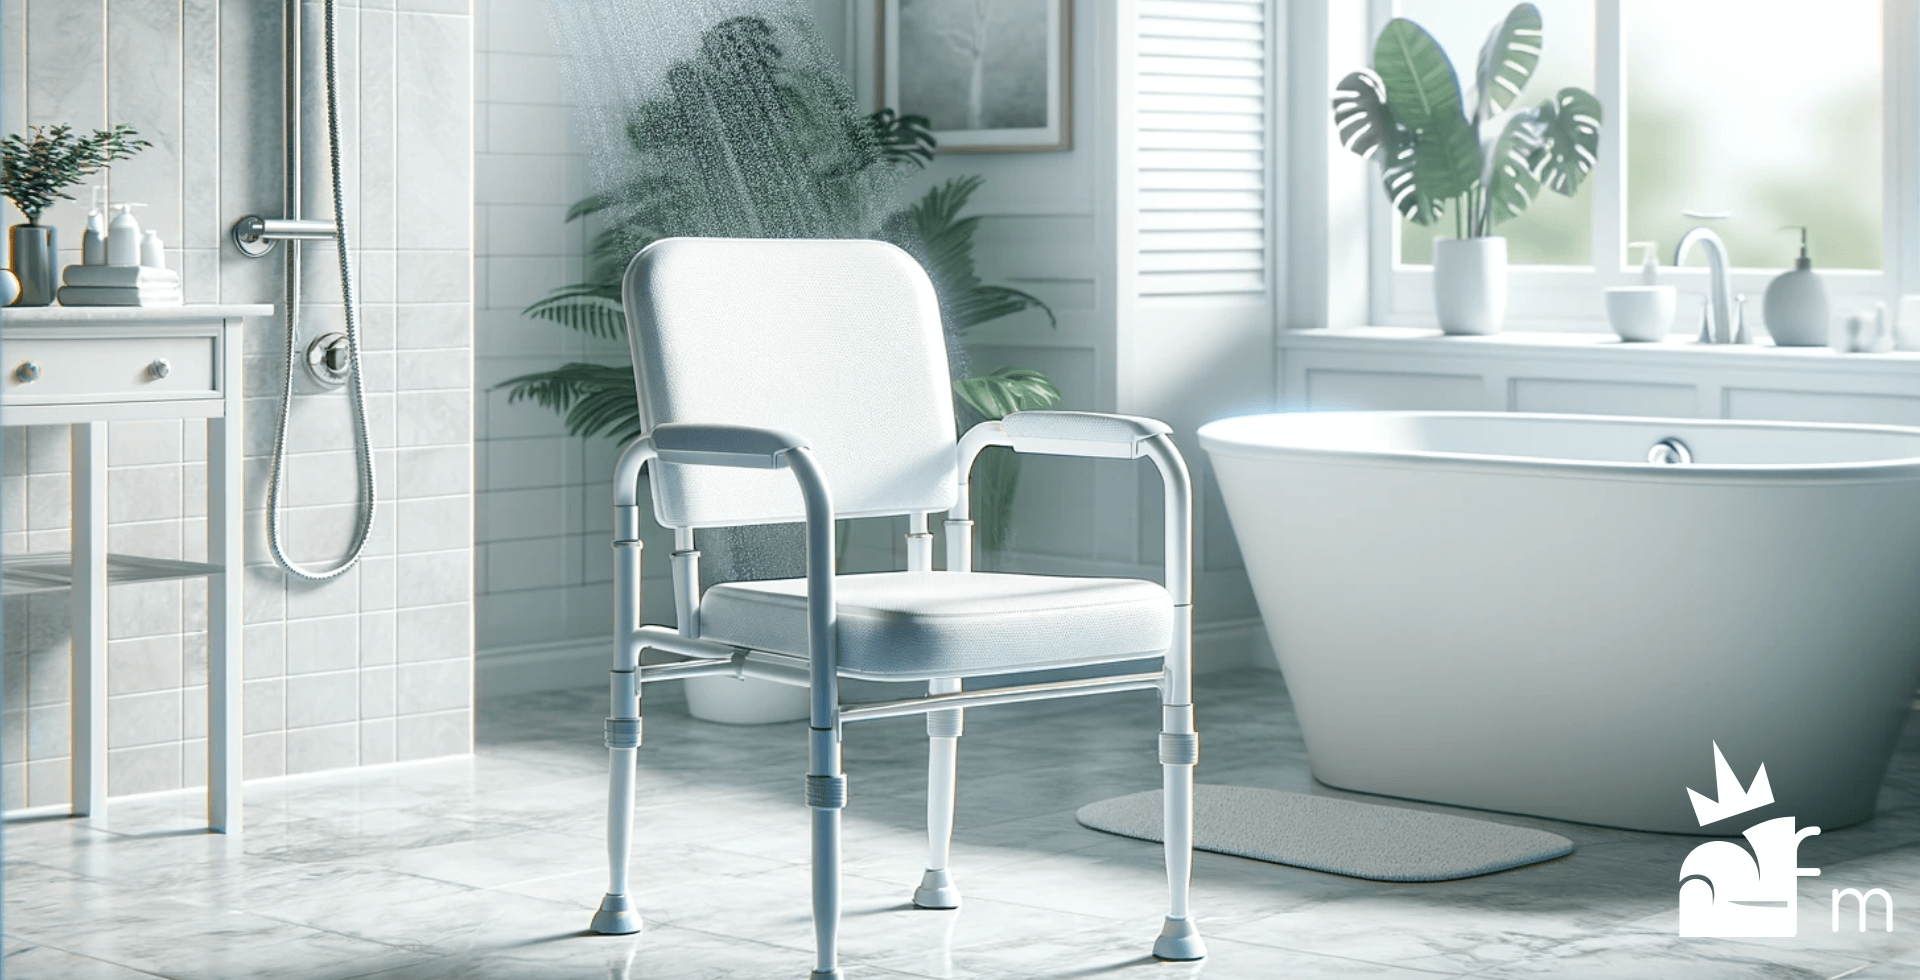 Best Shower Chair for